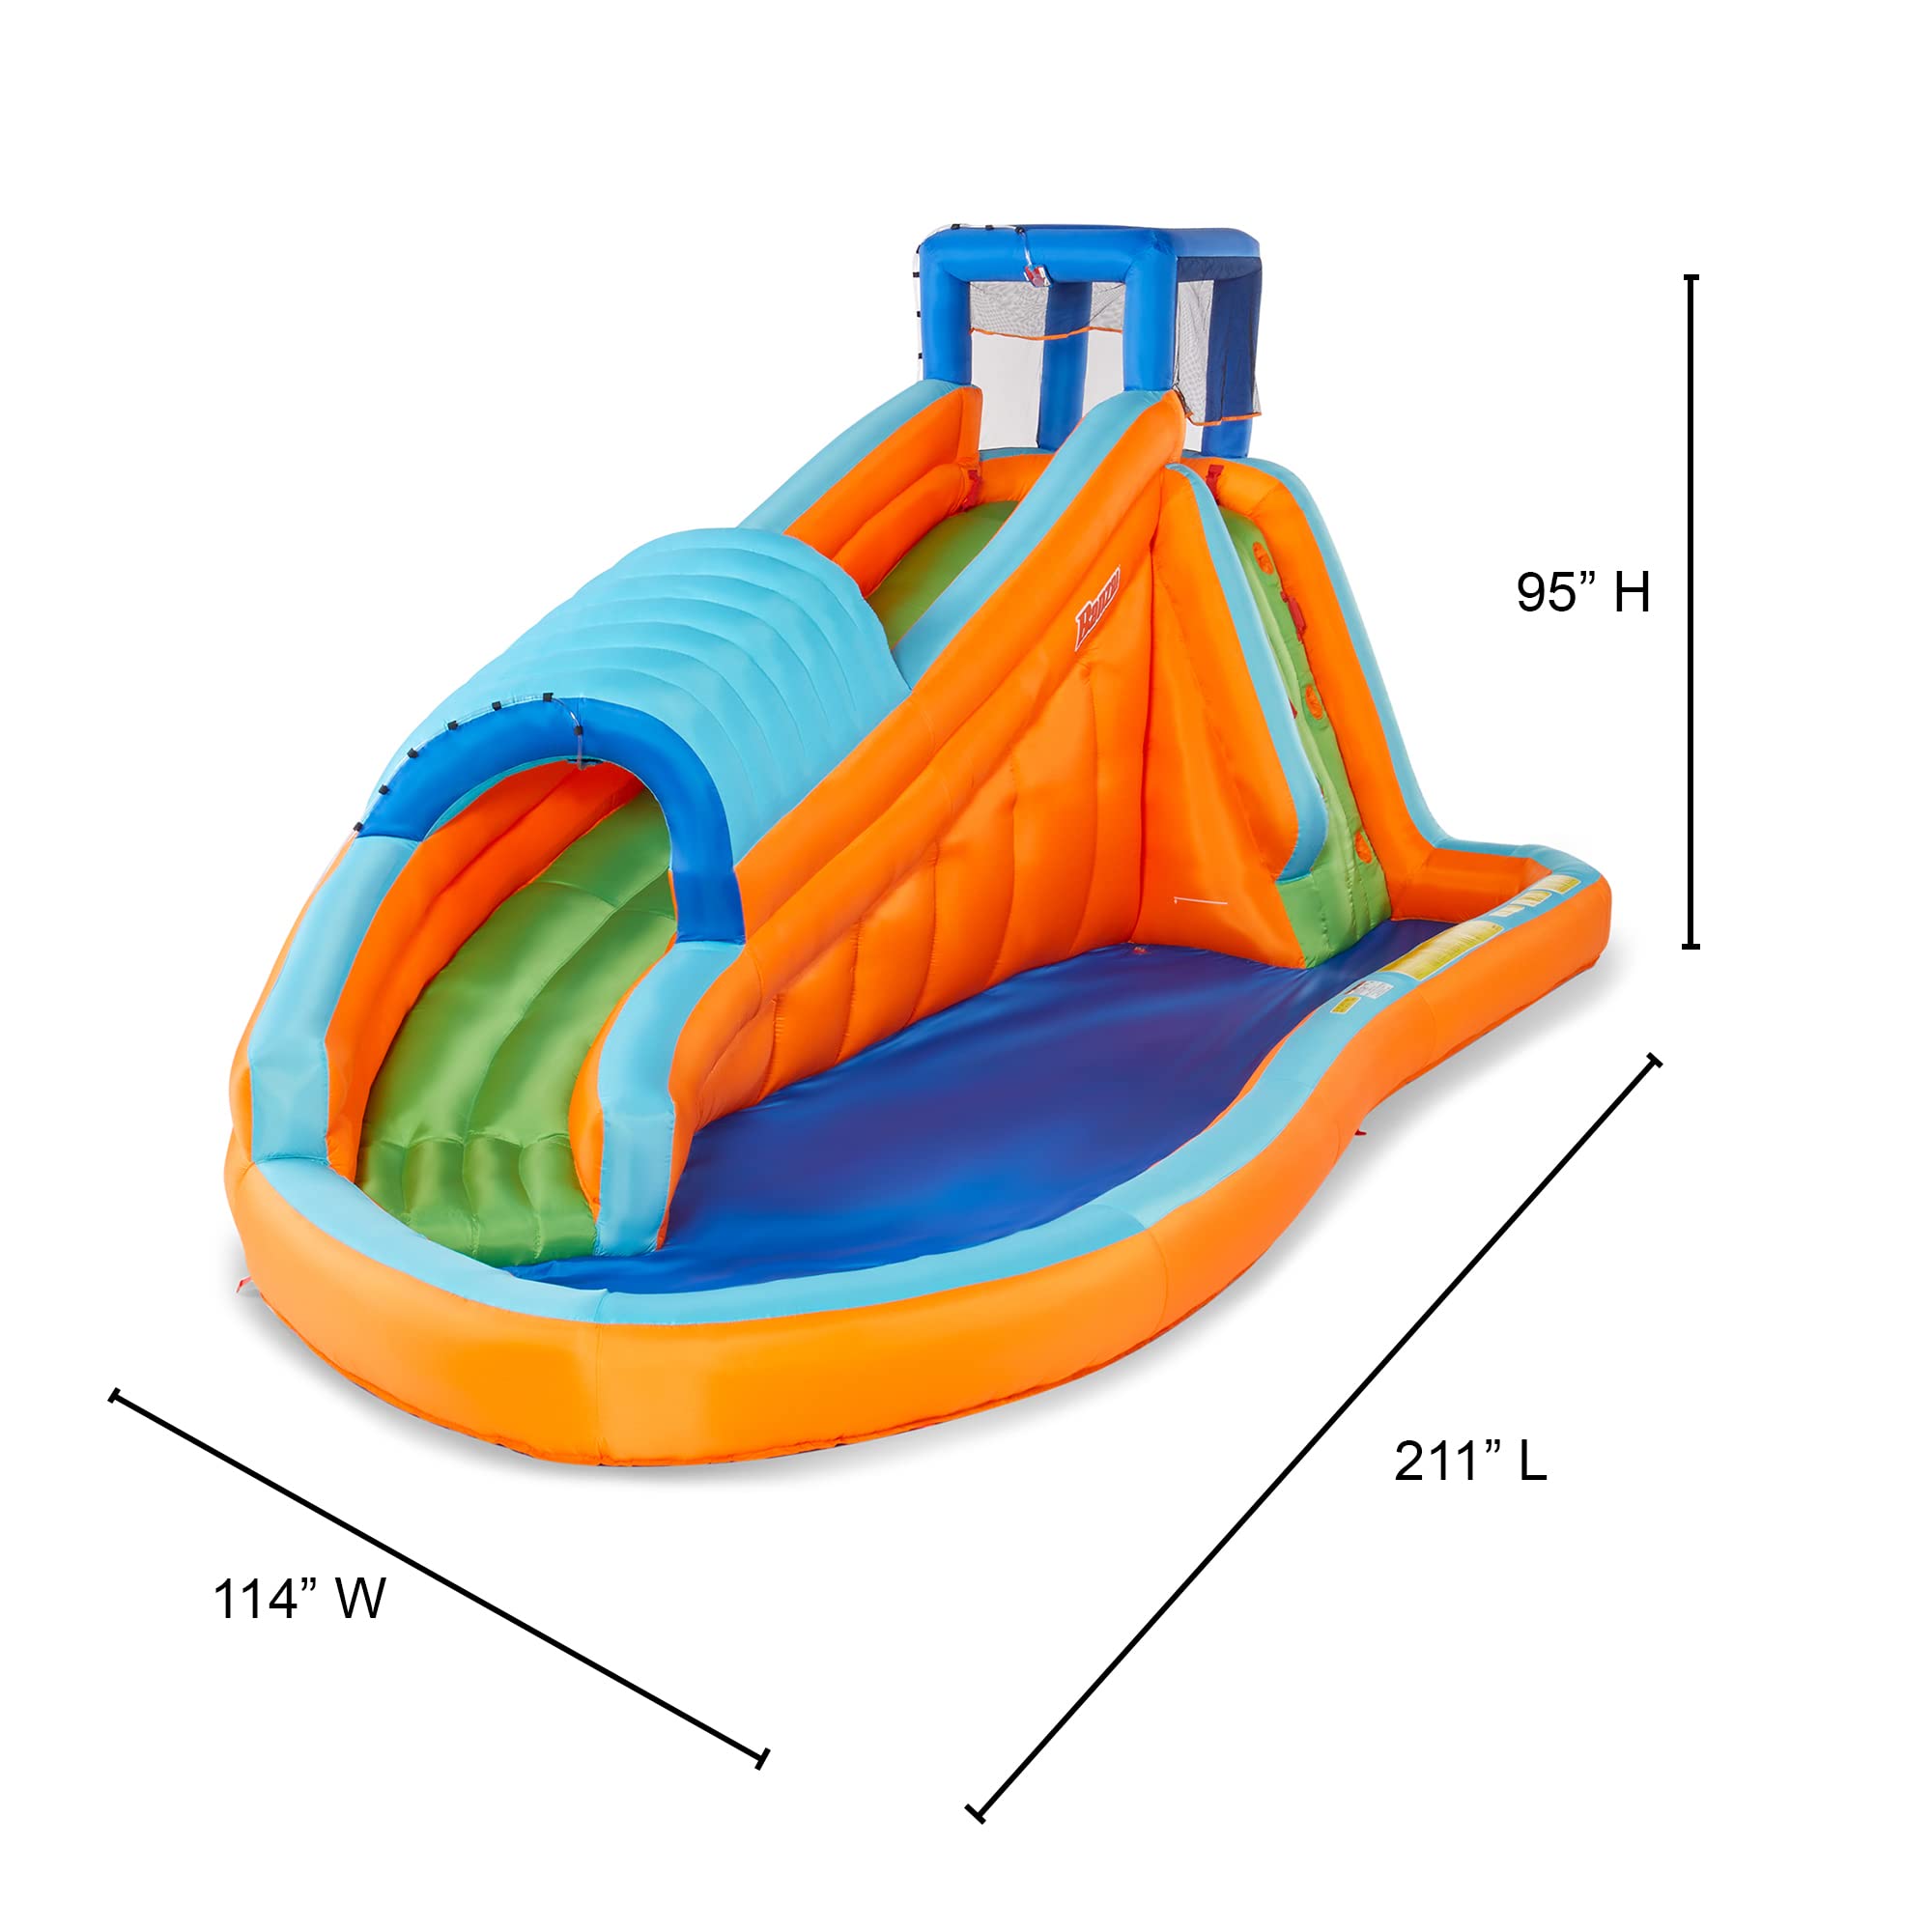 Banzai Surf Rider 17.5' L x 9.5' W x 7.9' H Inflatable Water Park with Waterslide, Pool, and Sprinklers